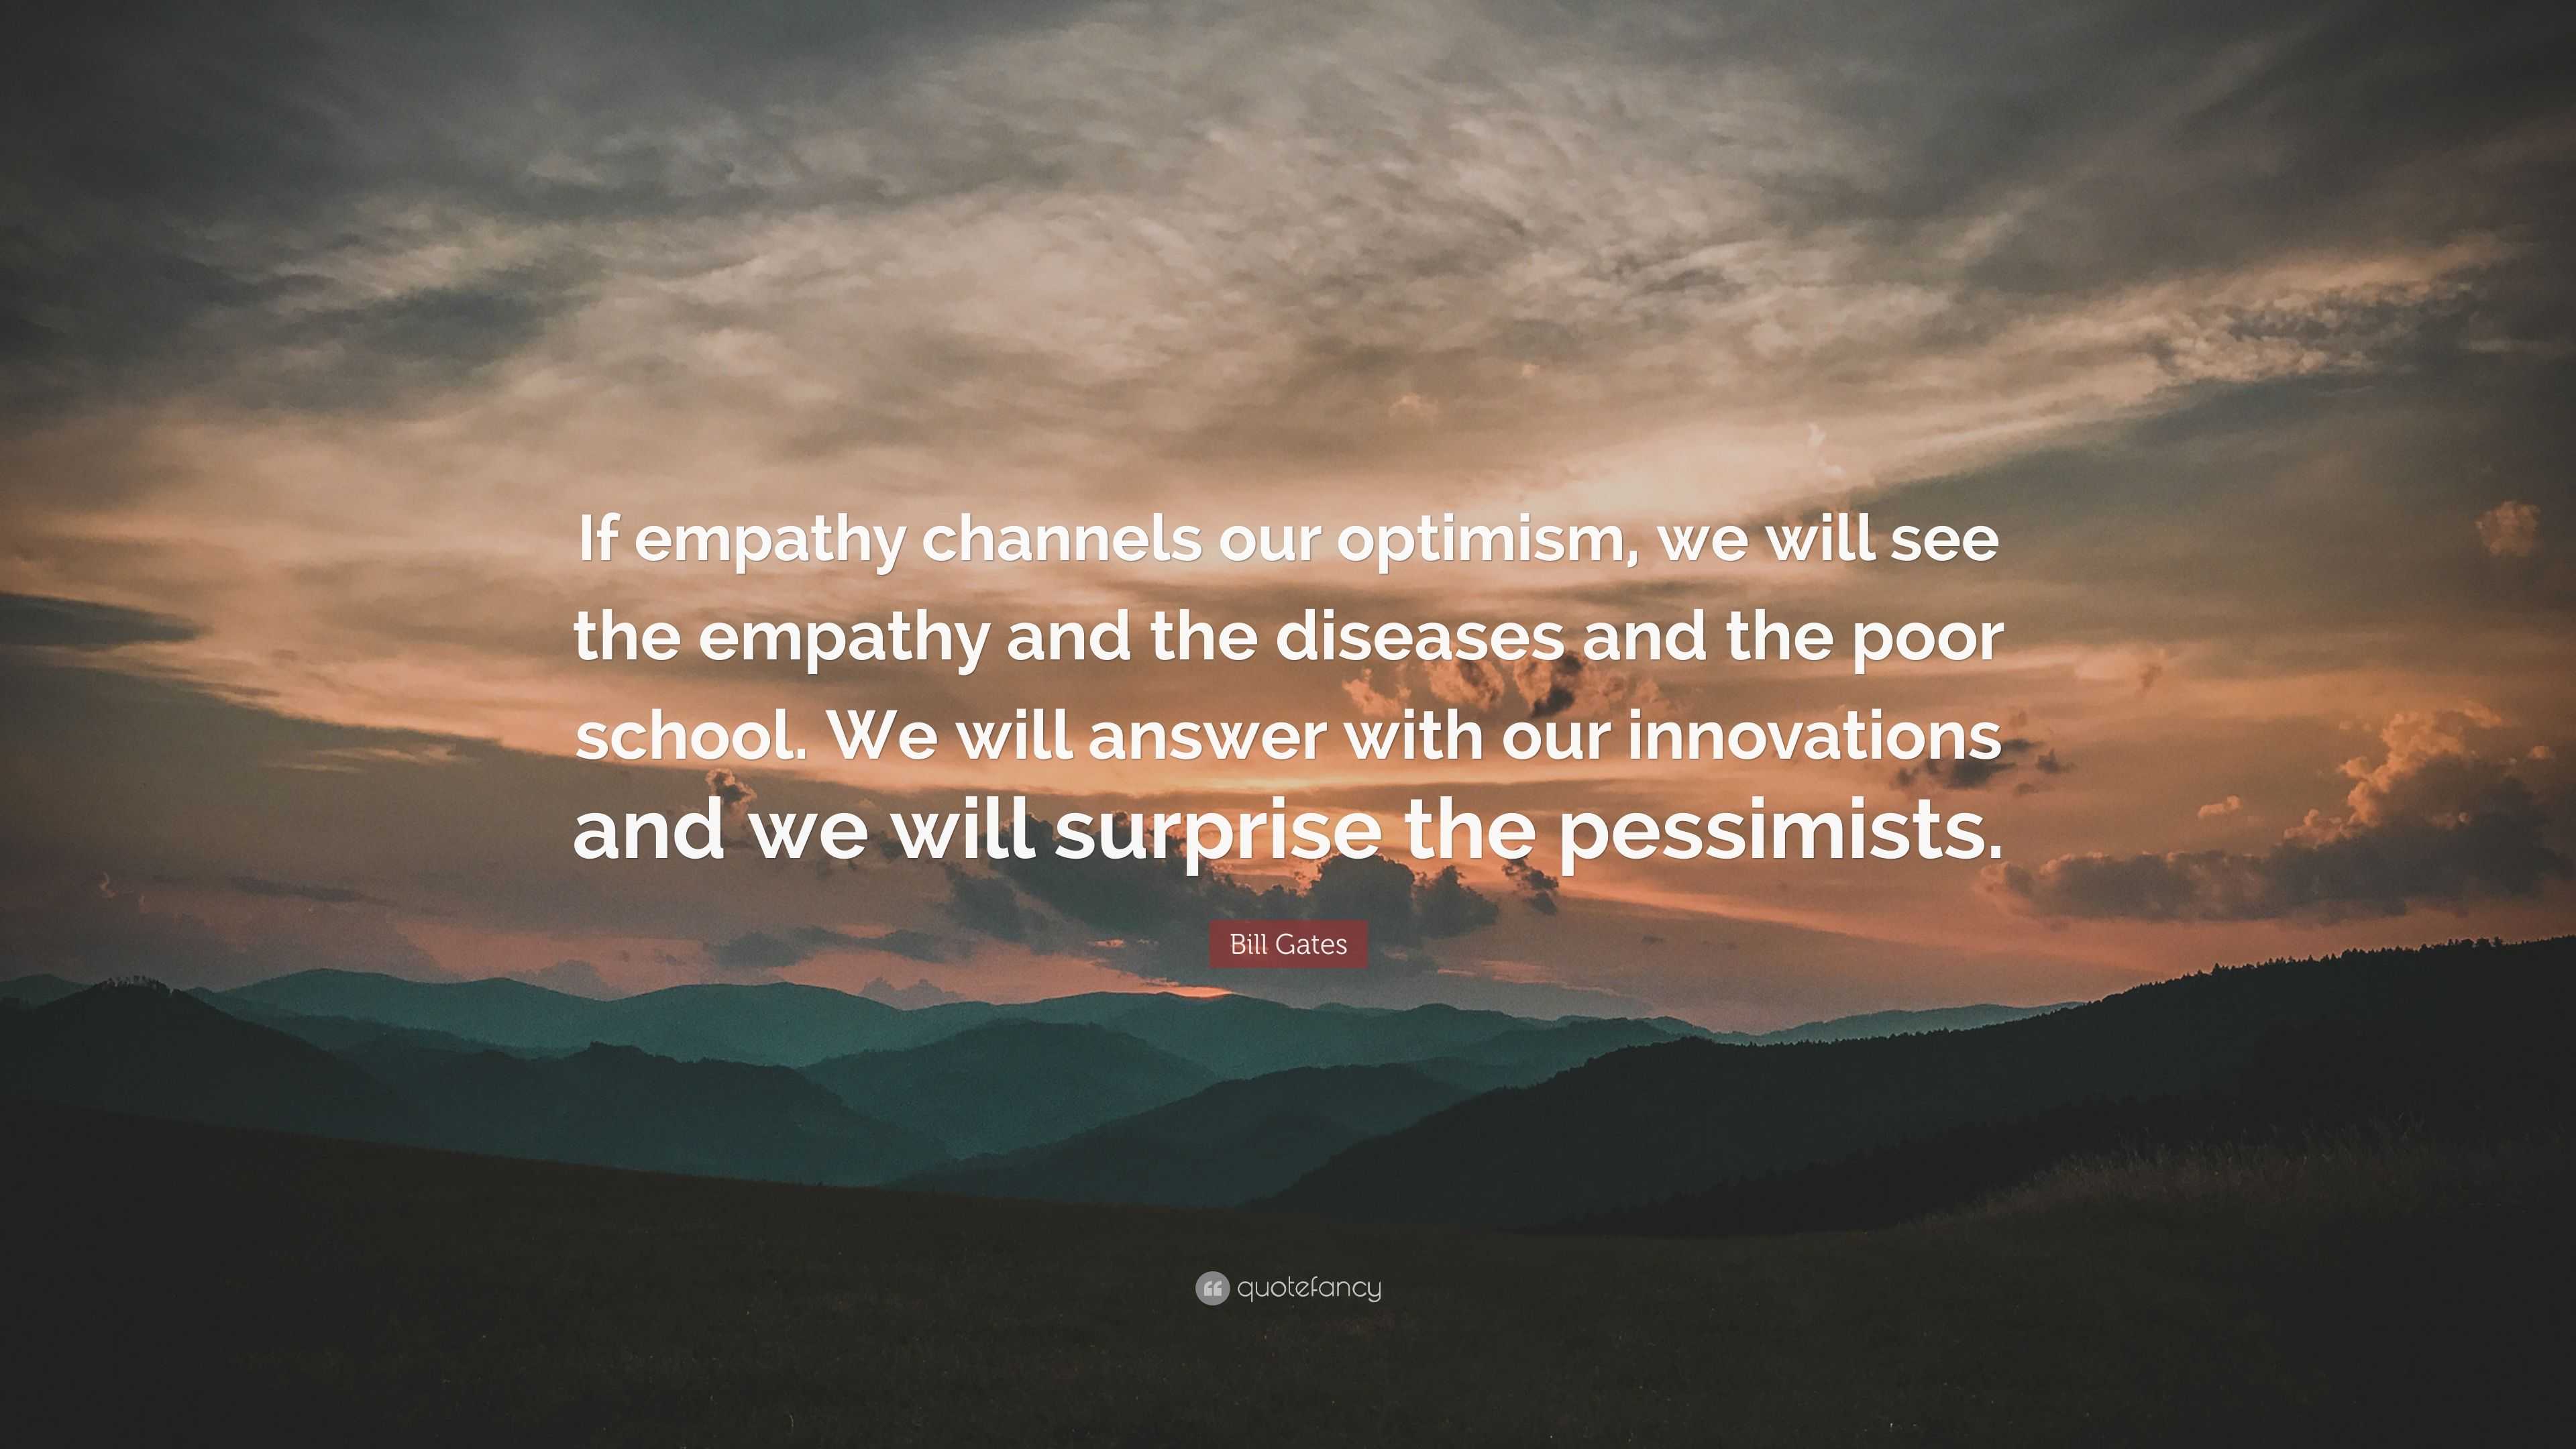 Bill Gates Quote: “If empathy channels our optimism, we will see the